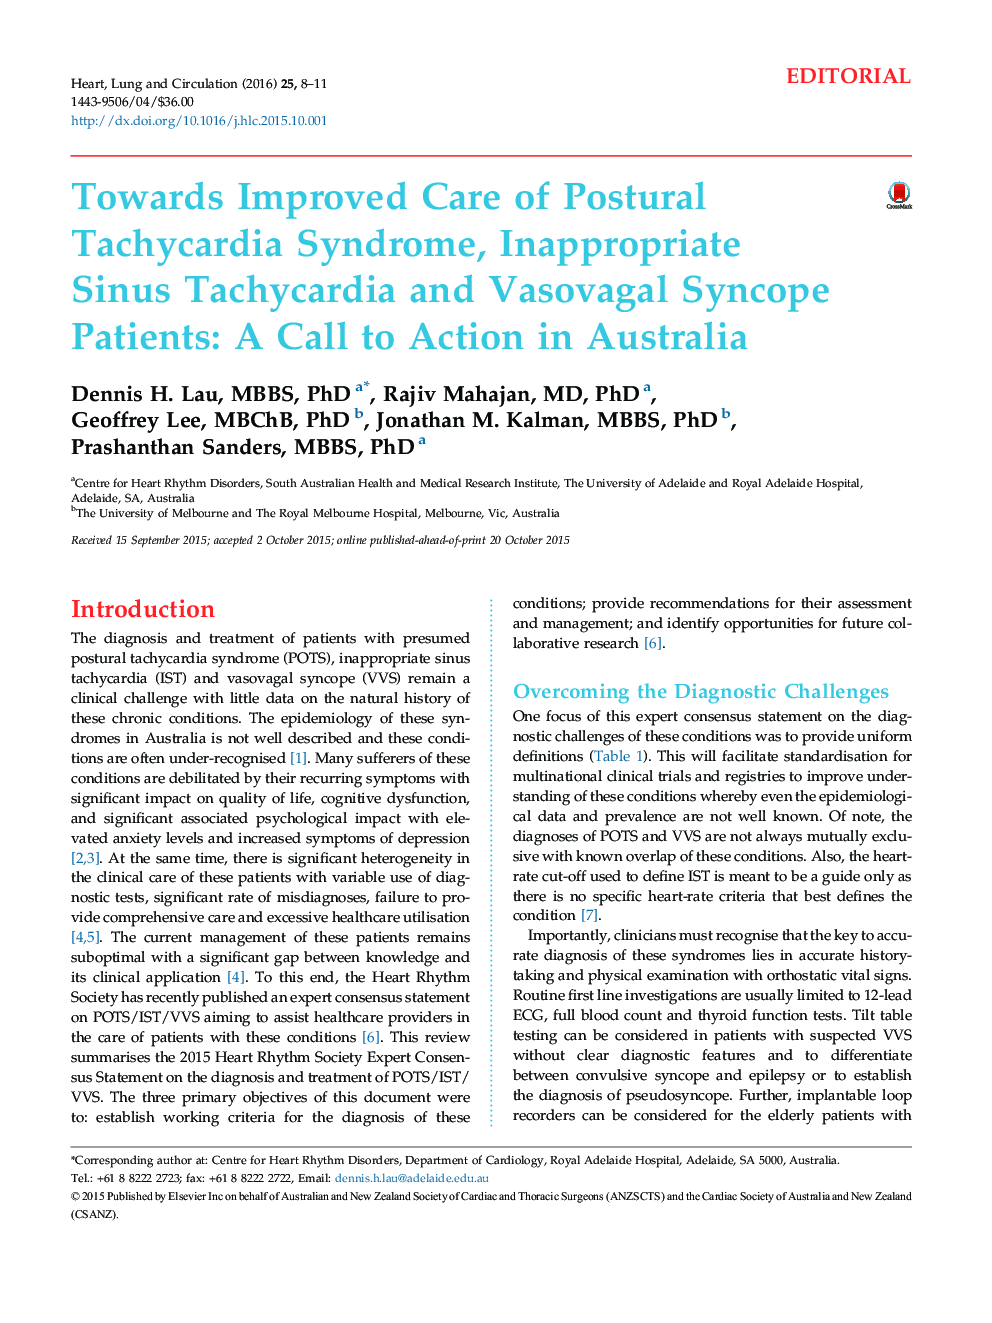 Towards Improved Care of Postural Tachycardia Syndrome, Inappropriate Sinus Tachycardia and Vasovagal Syncope Patients: A Call to Action in Australia